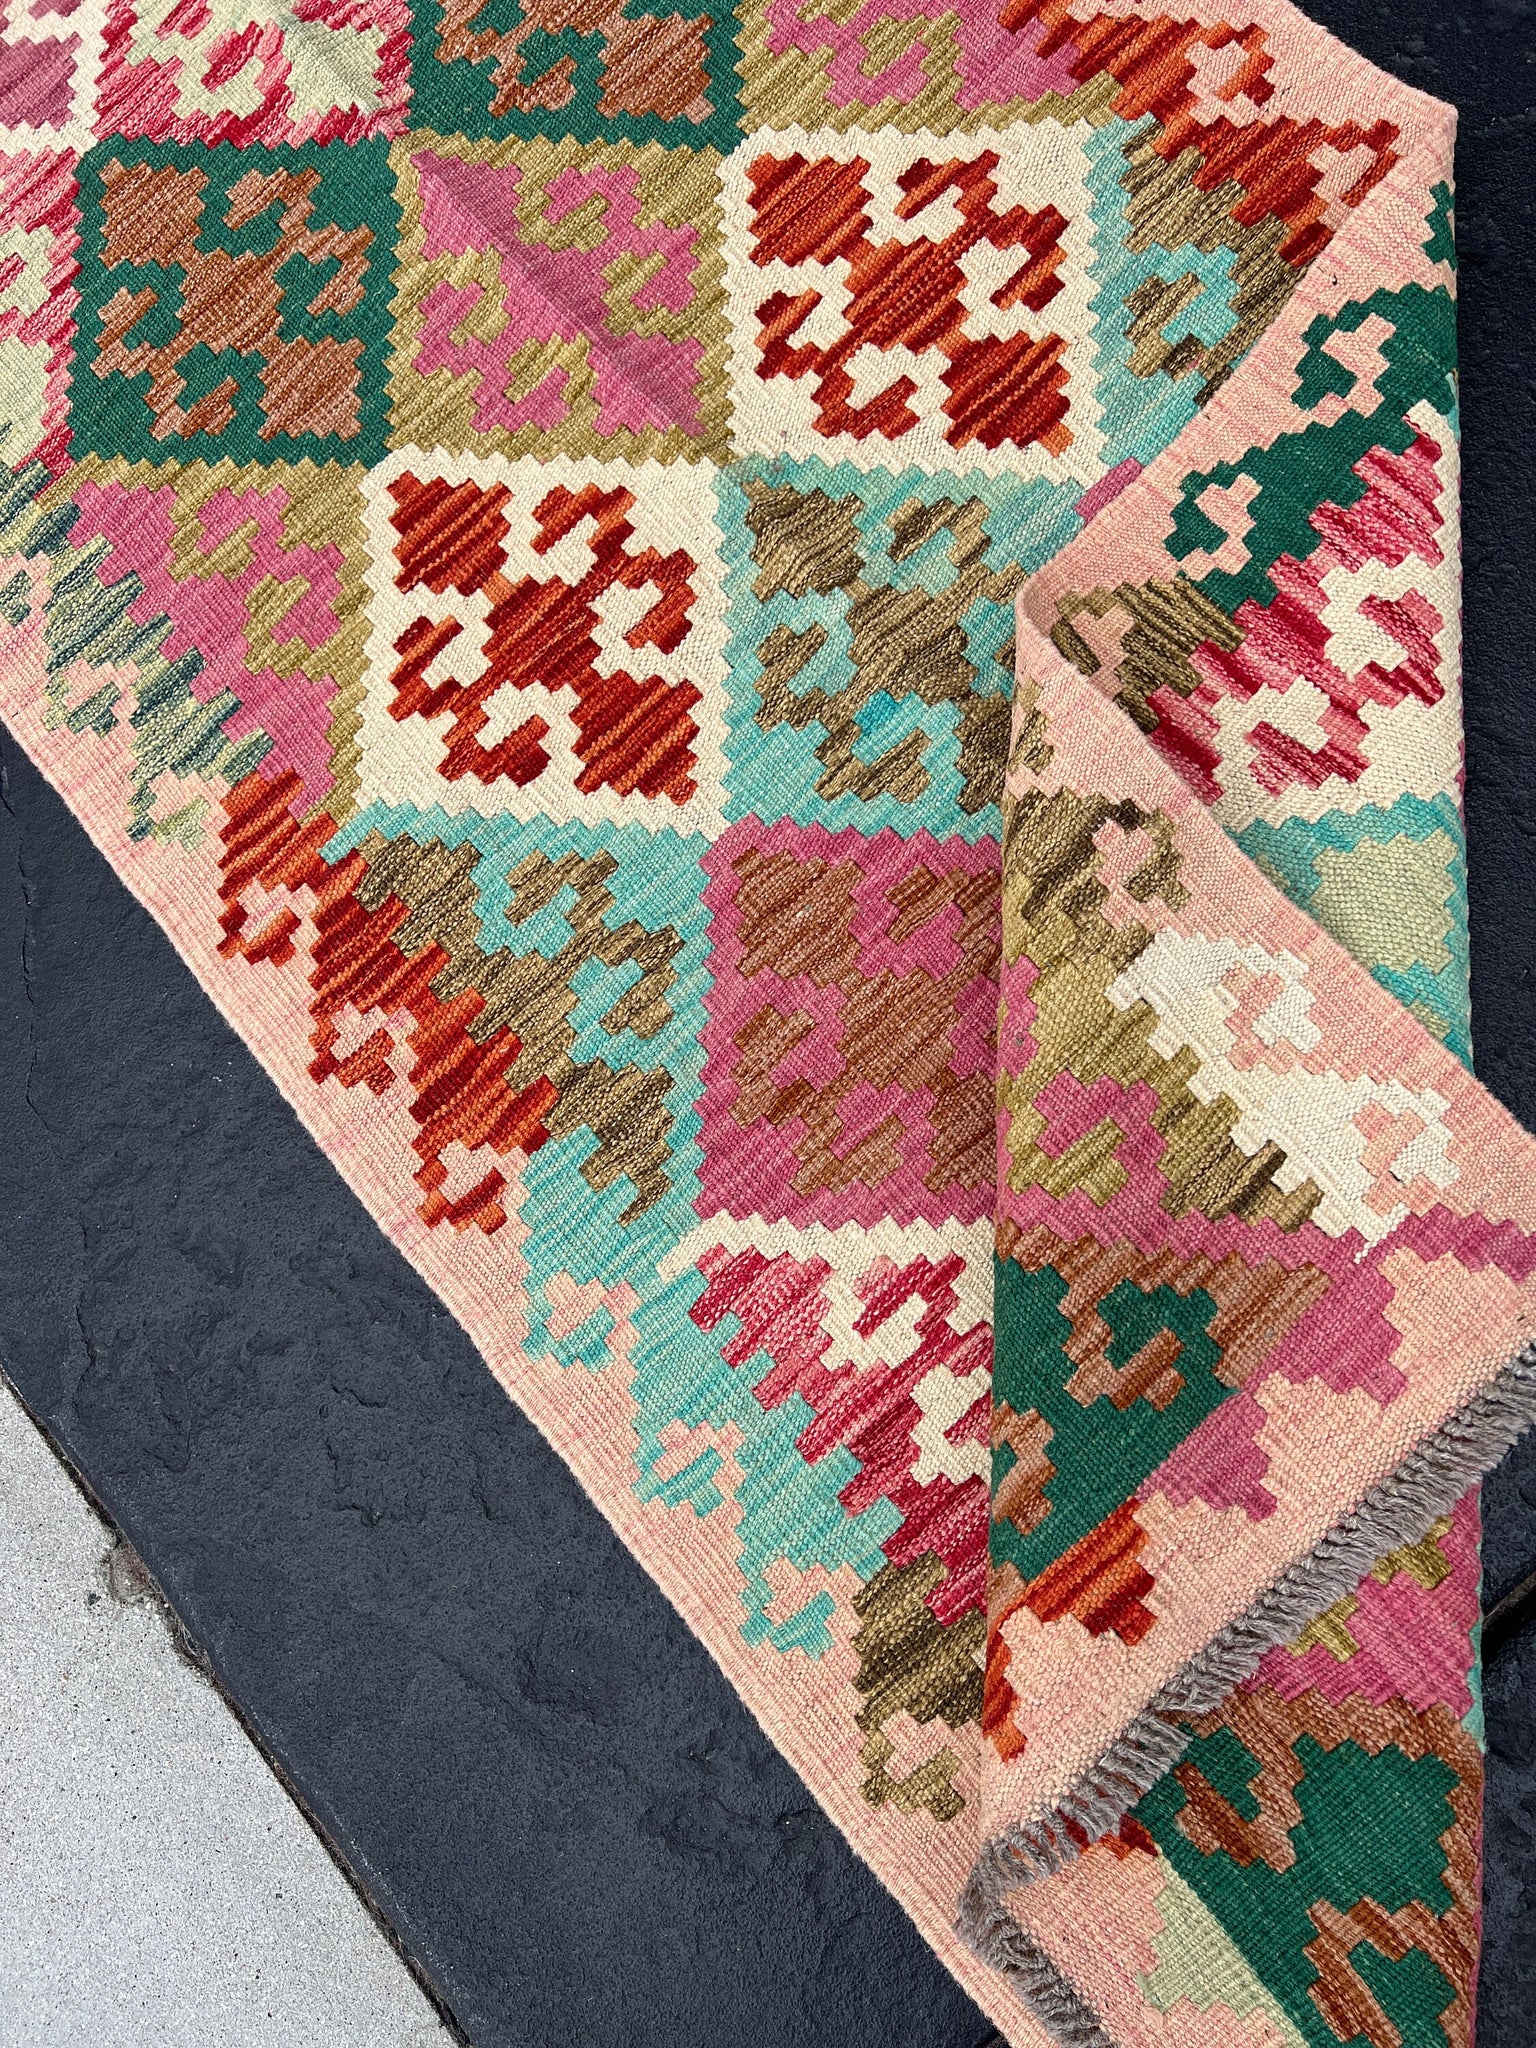 3x10 (91x305) Handmade Afghan Kilim Runner Rug | Coral Fuchsia Pink Turquoise Forest Moss Mint Green Blood Red Cream Brown | Wool Outdoor